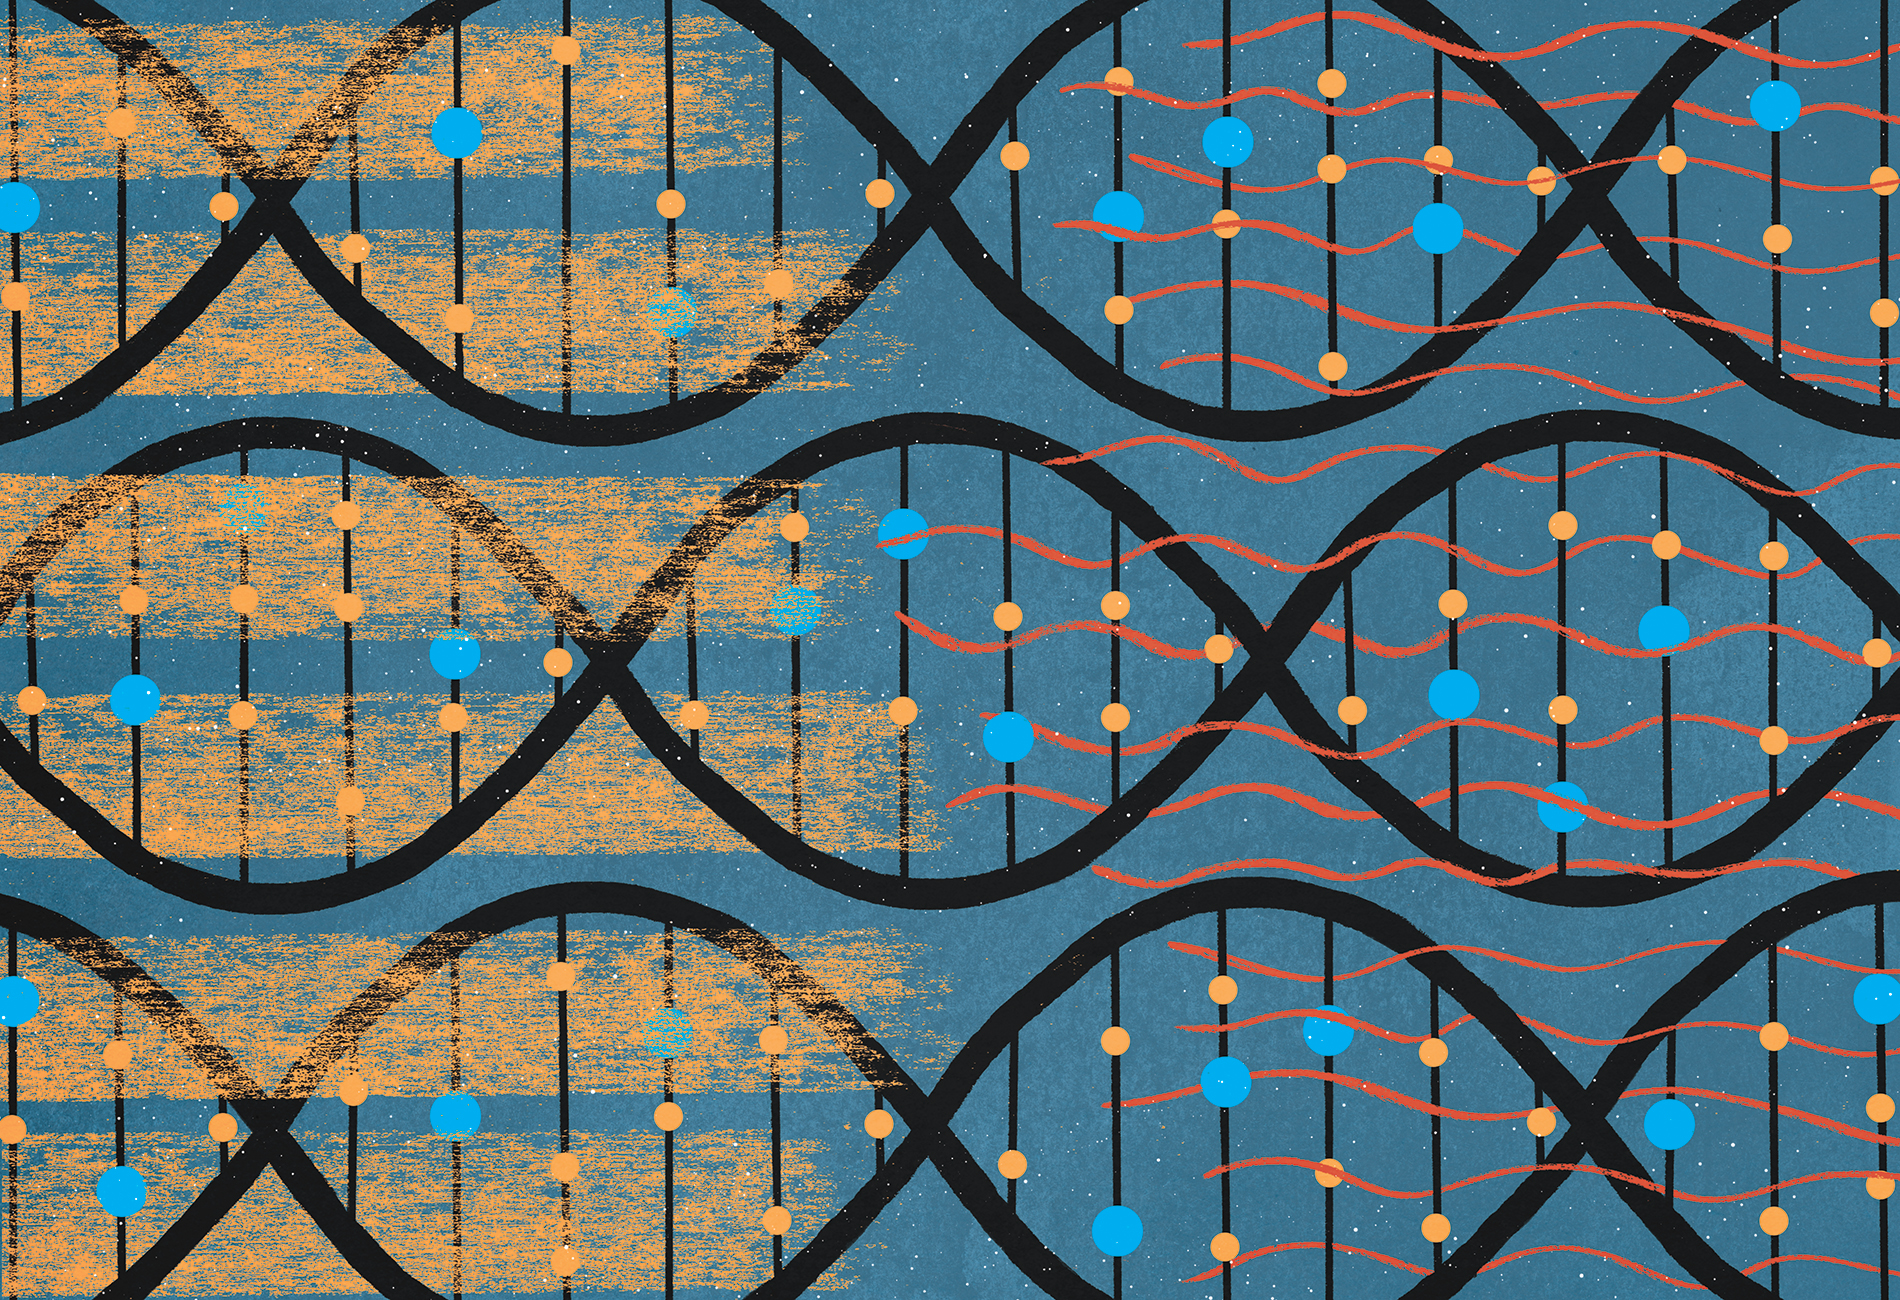 illustration shows DNA strands underneath overlapping textures, signifying blurred lines